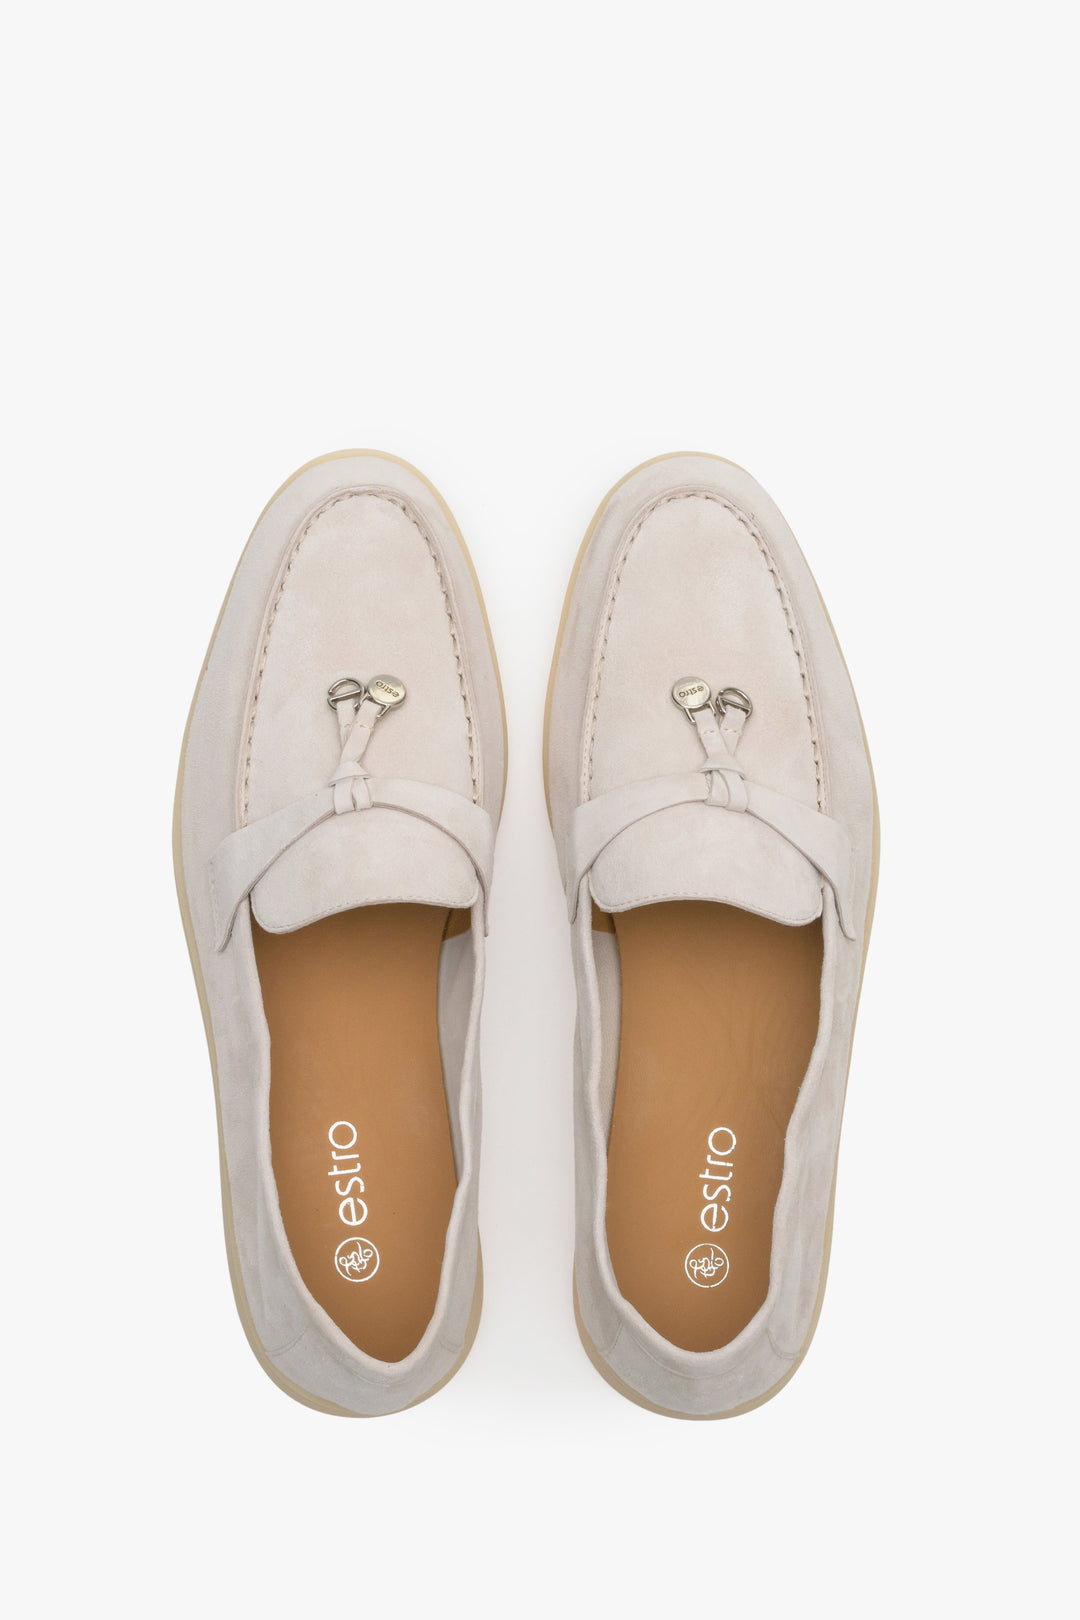 Women's cream beige velour loafers - presentation from above.